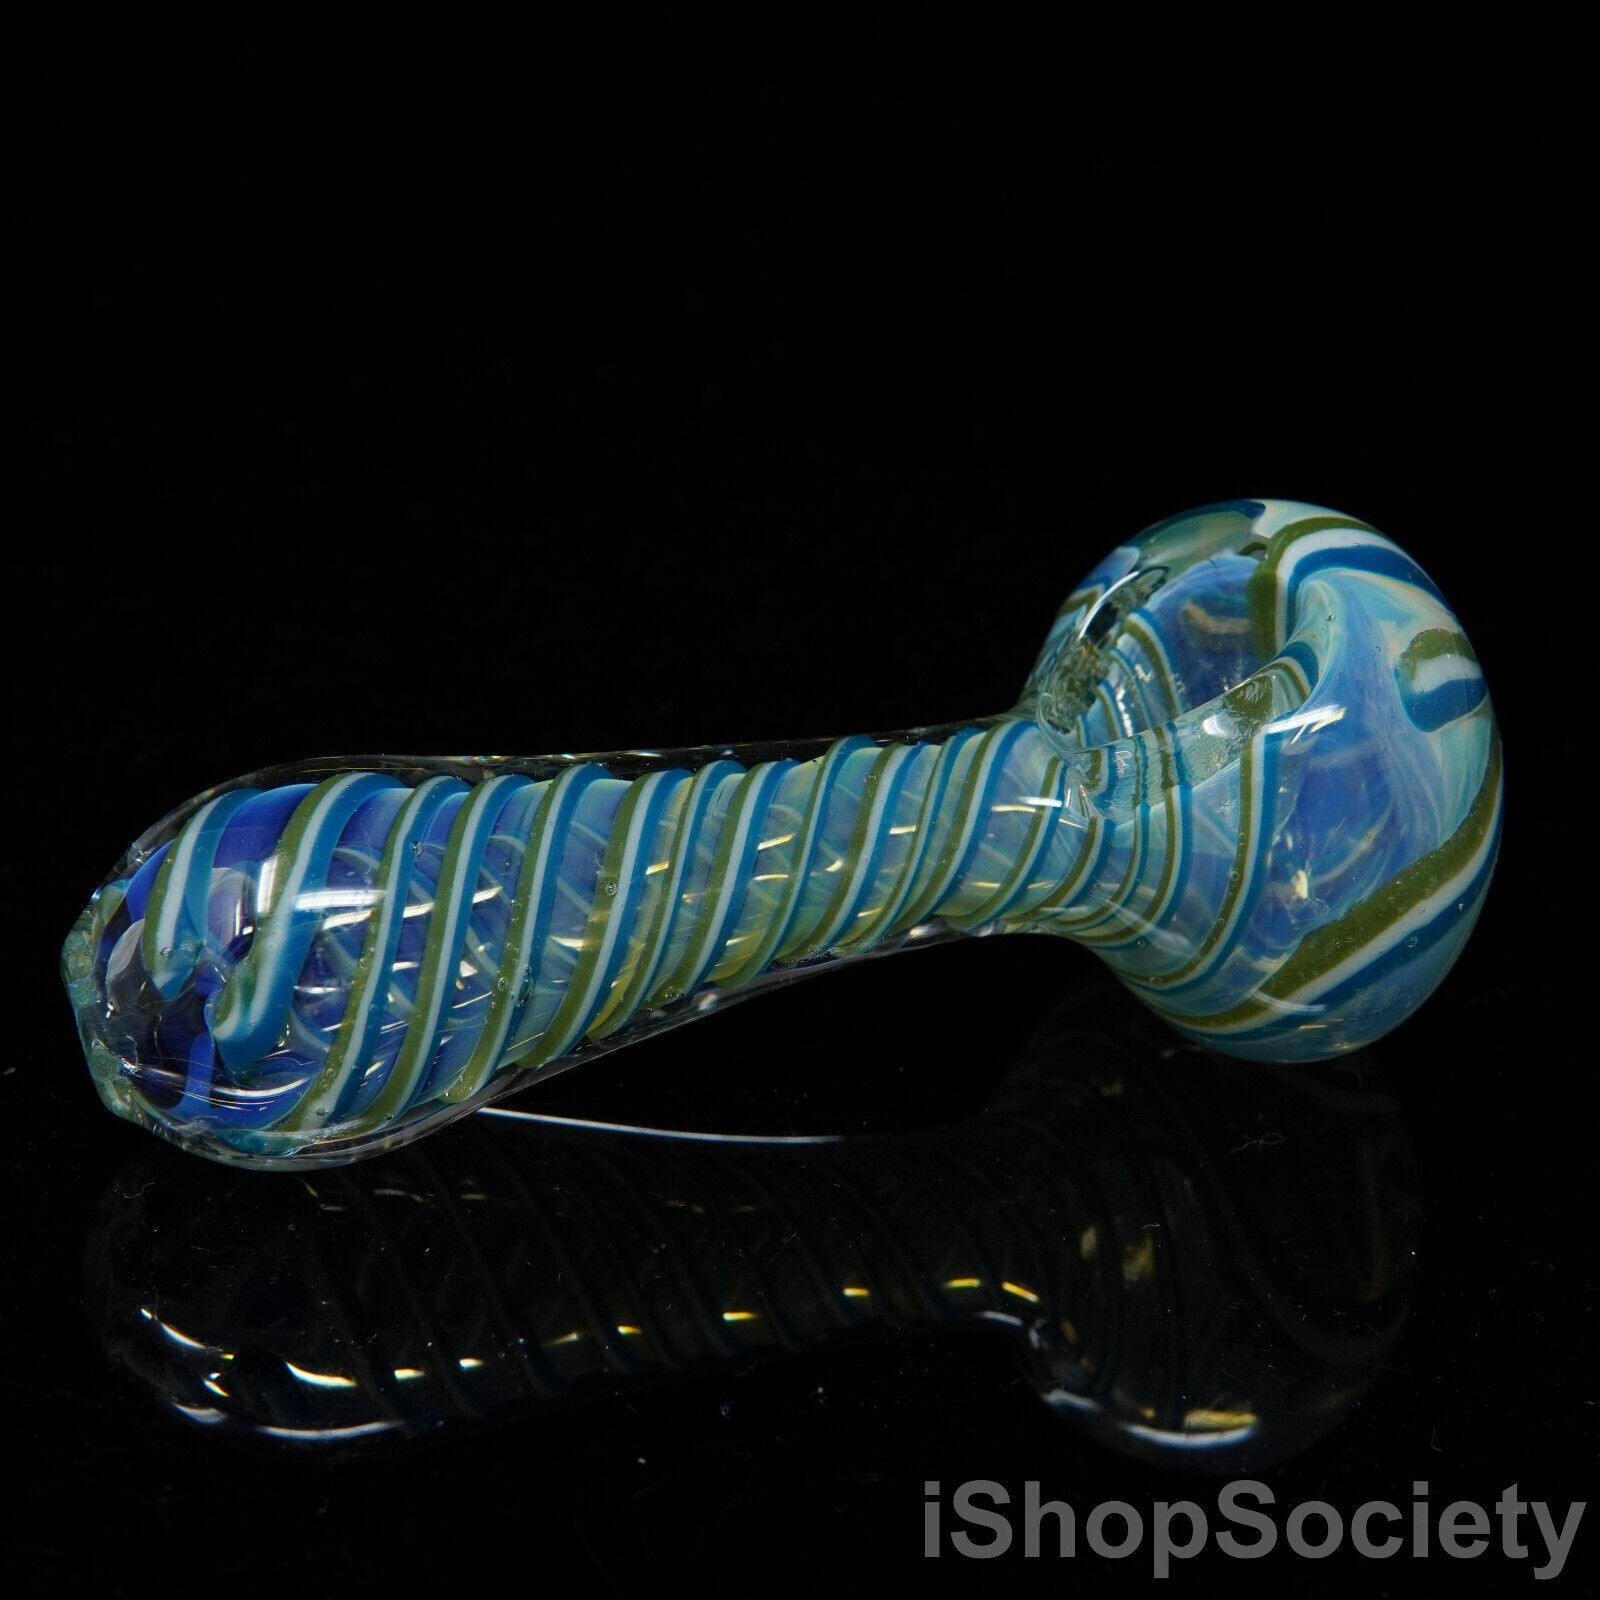 3.5 Portable Fumed Swirl Tobacco Smoking Pipe Thick Collectible Pipes - P368C. Available Now for 8.99